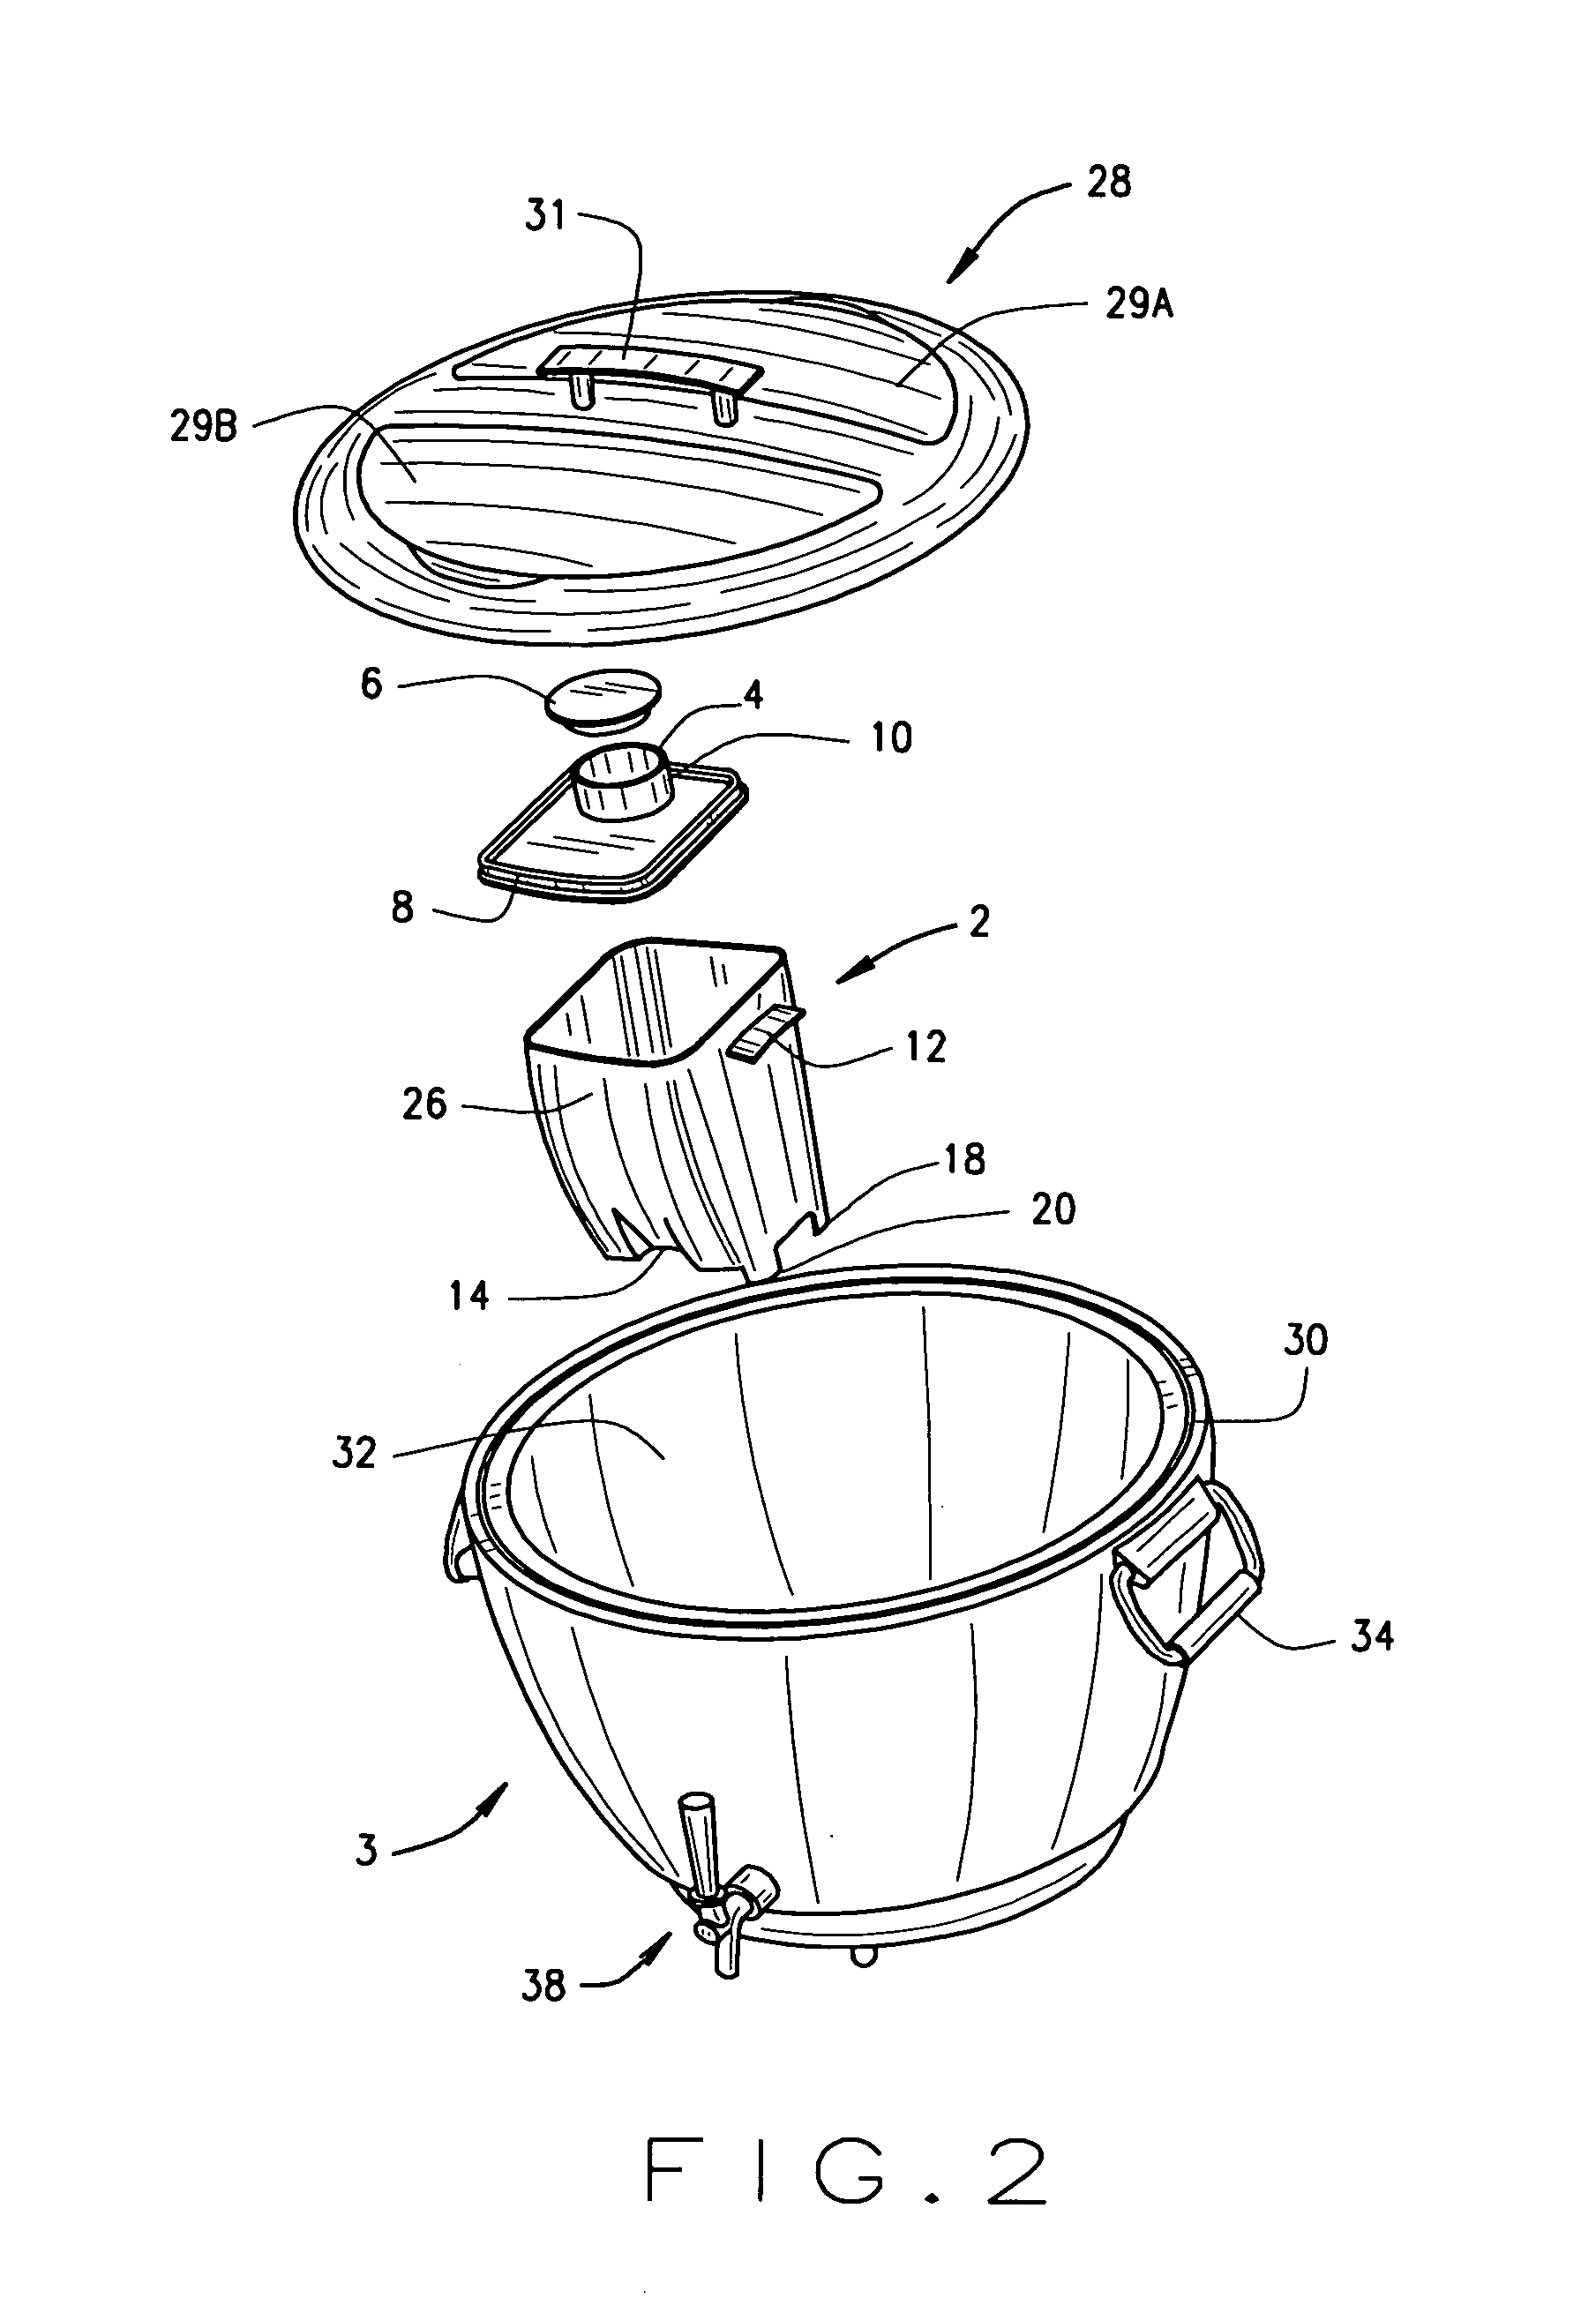 Beverage cooling and dispensing unit